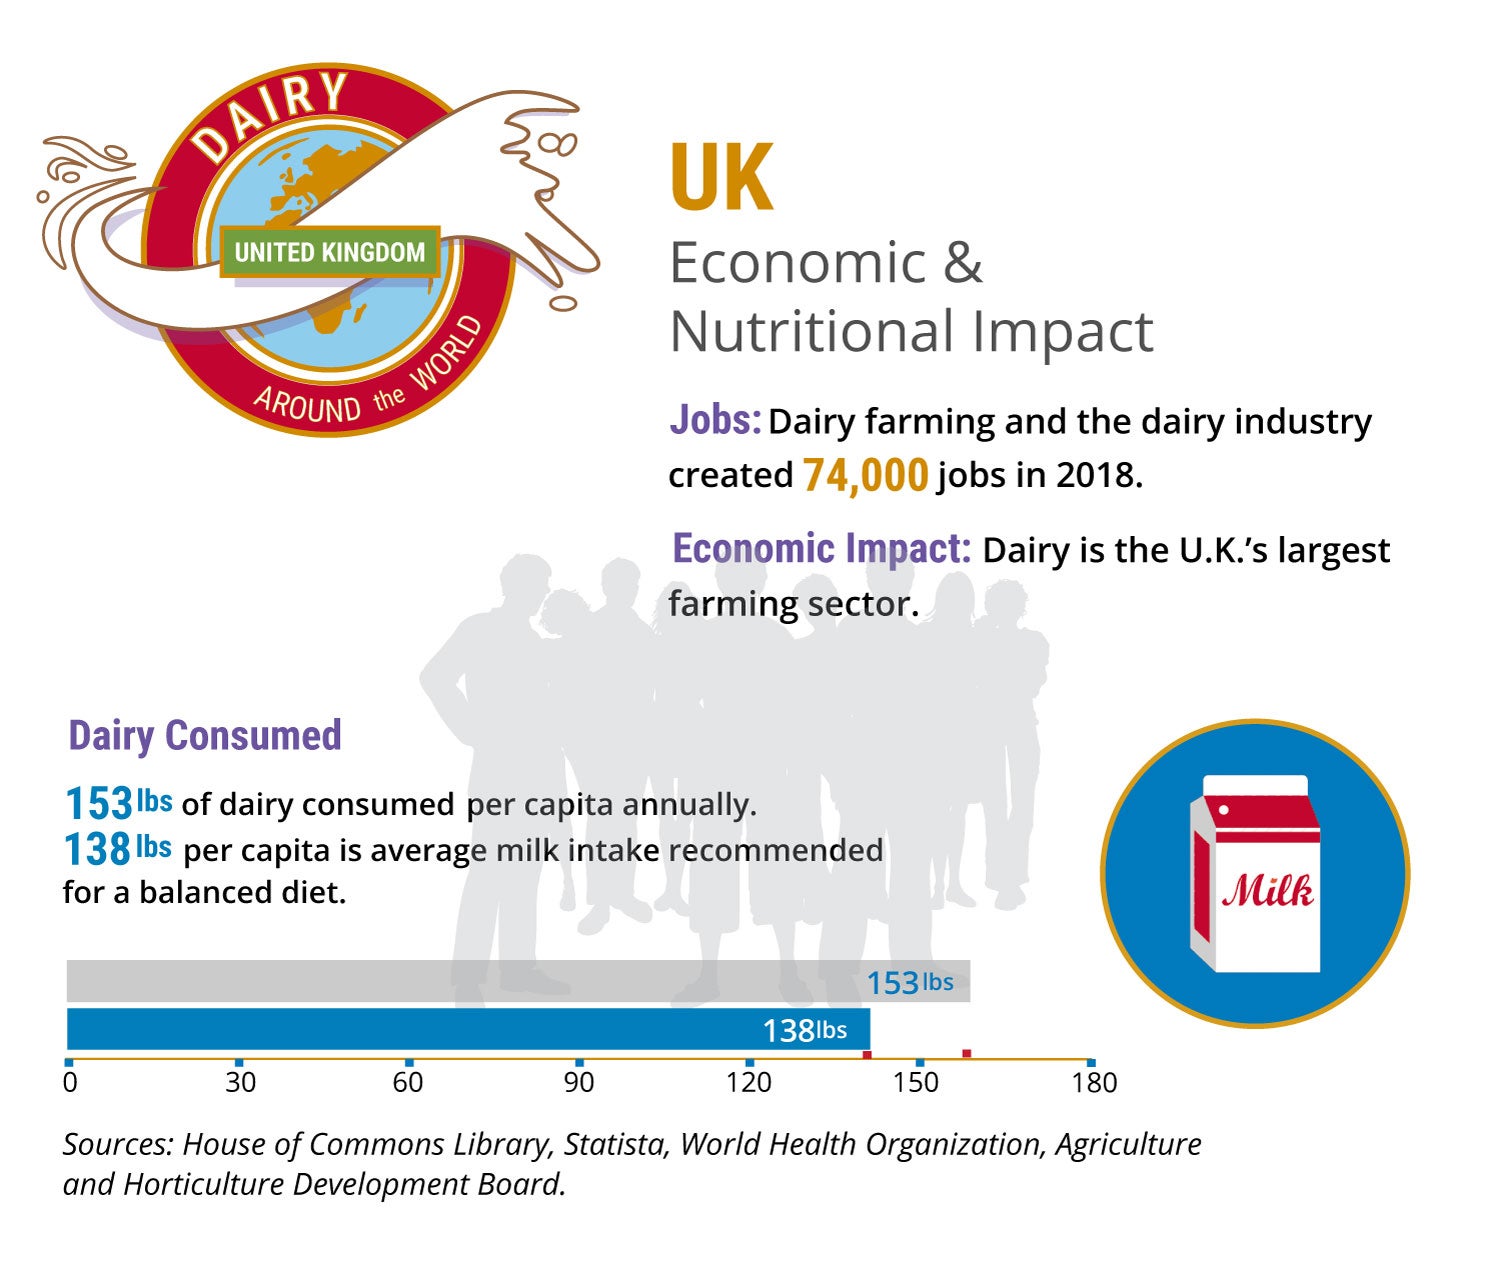 Dairy Around the World infographic depicting economic challenges for UK dairy farmers